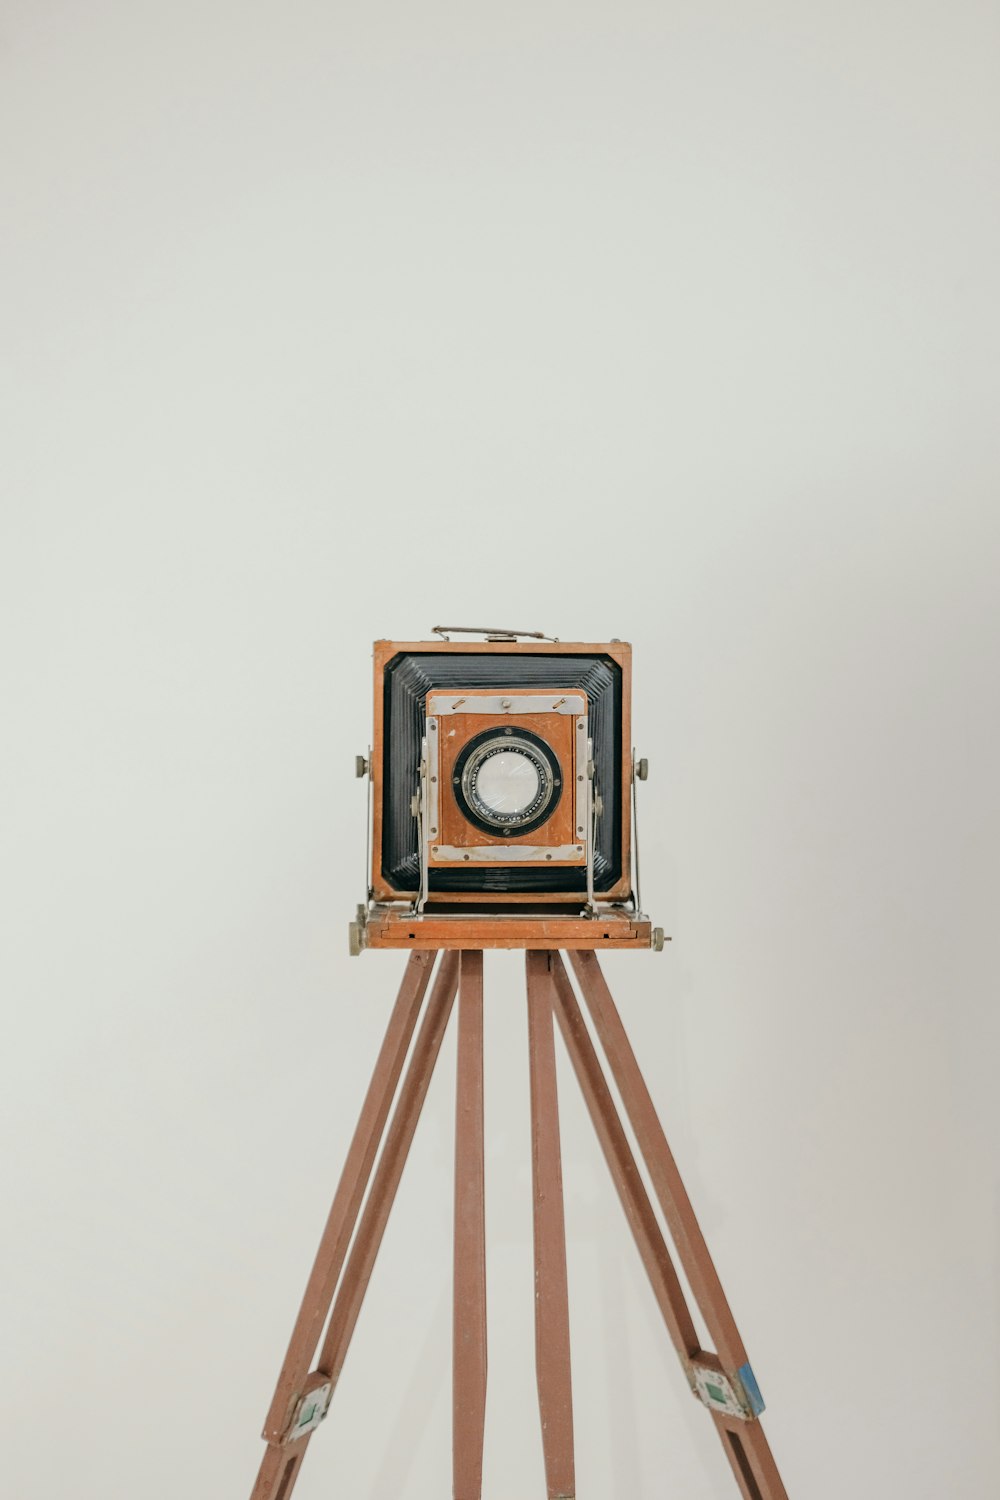 a wooden tripod with a camera on top of it